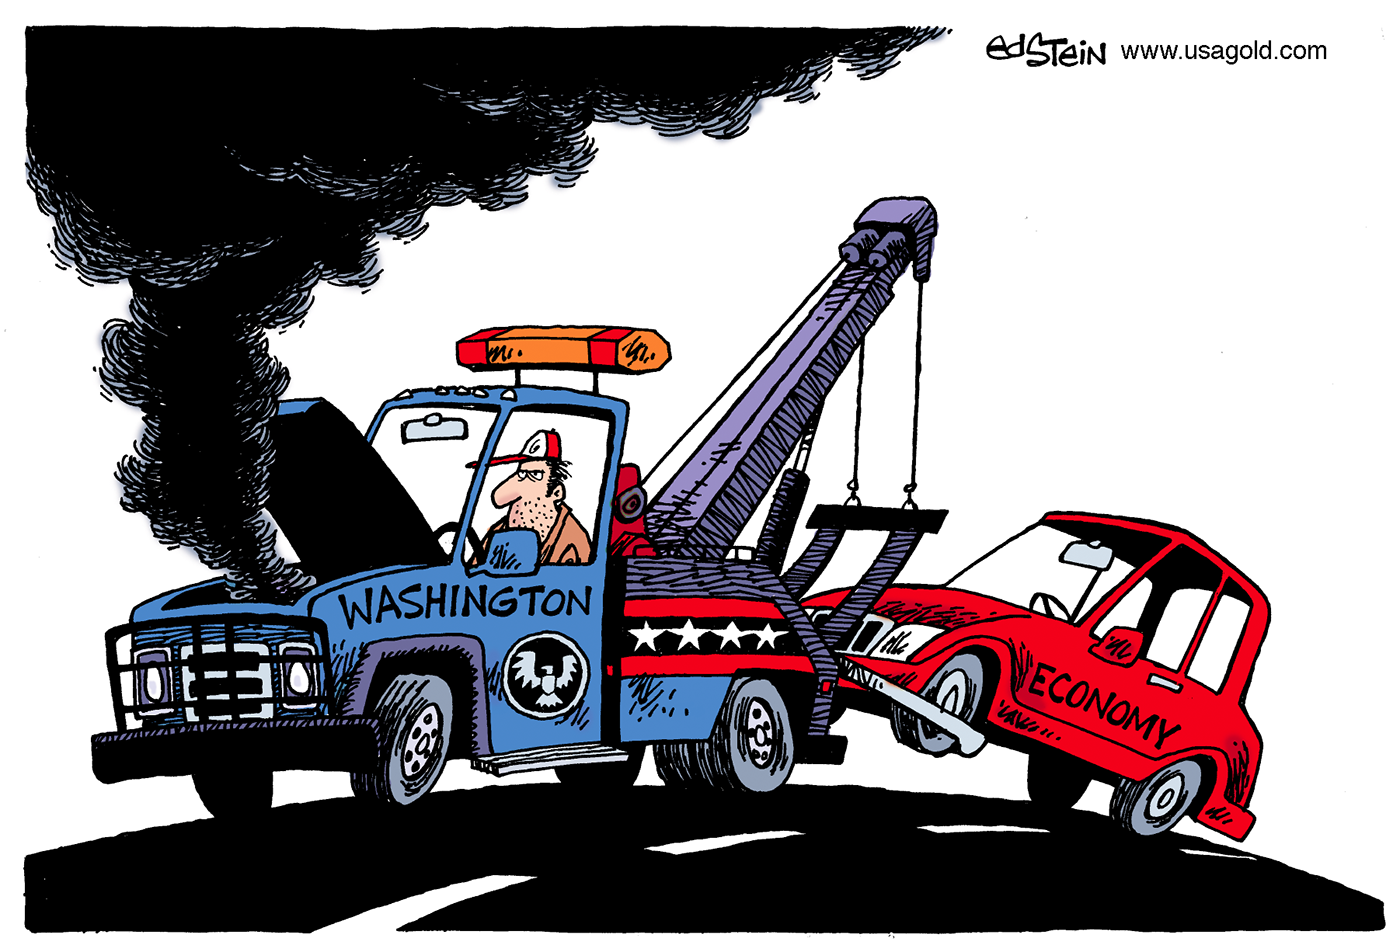 cartoon of a tow truck marked Washington towing a car marked economy